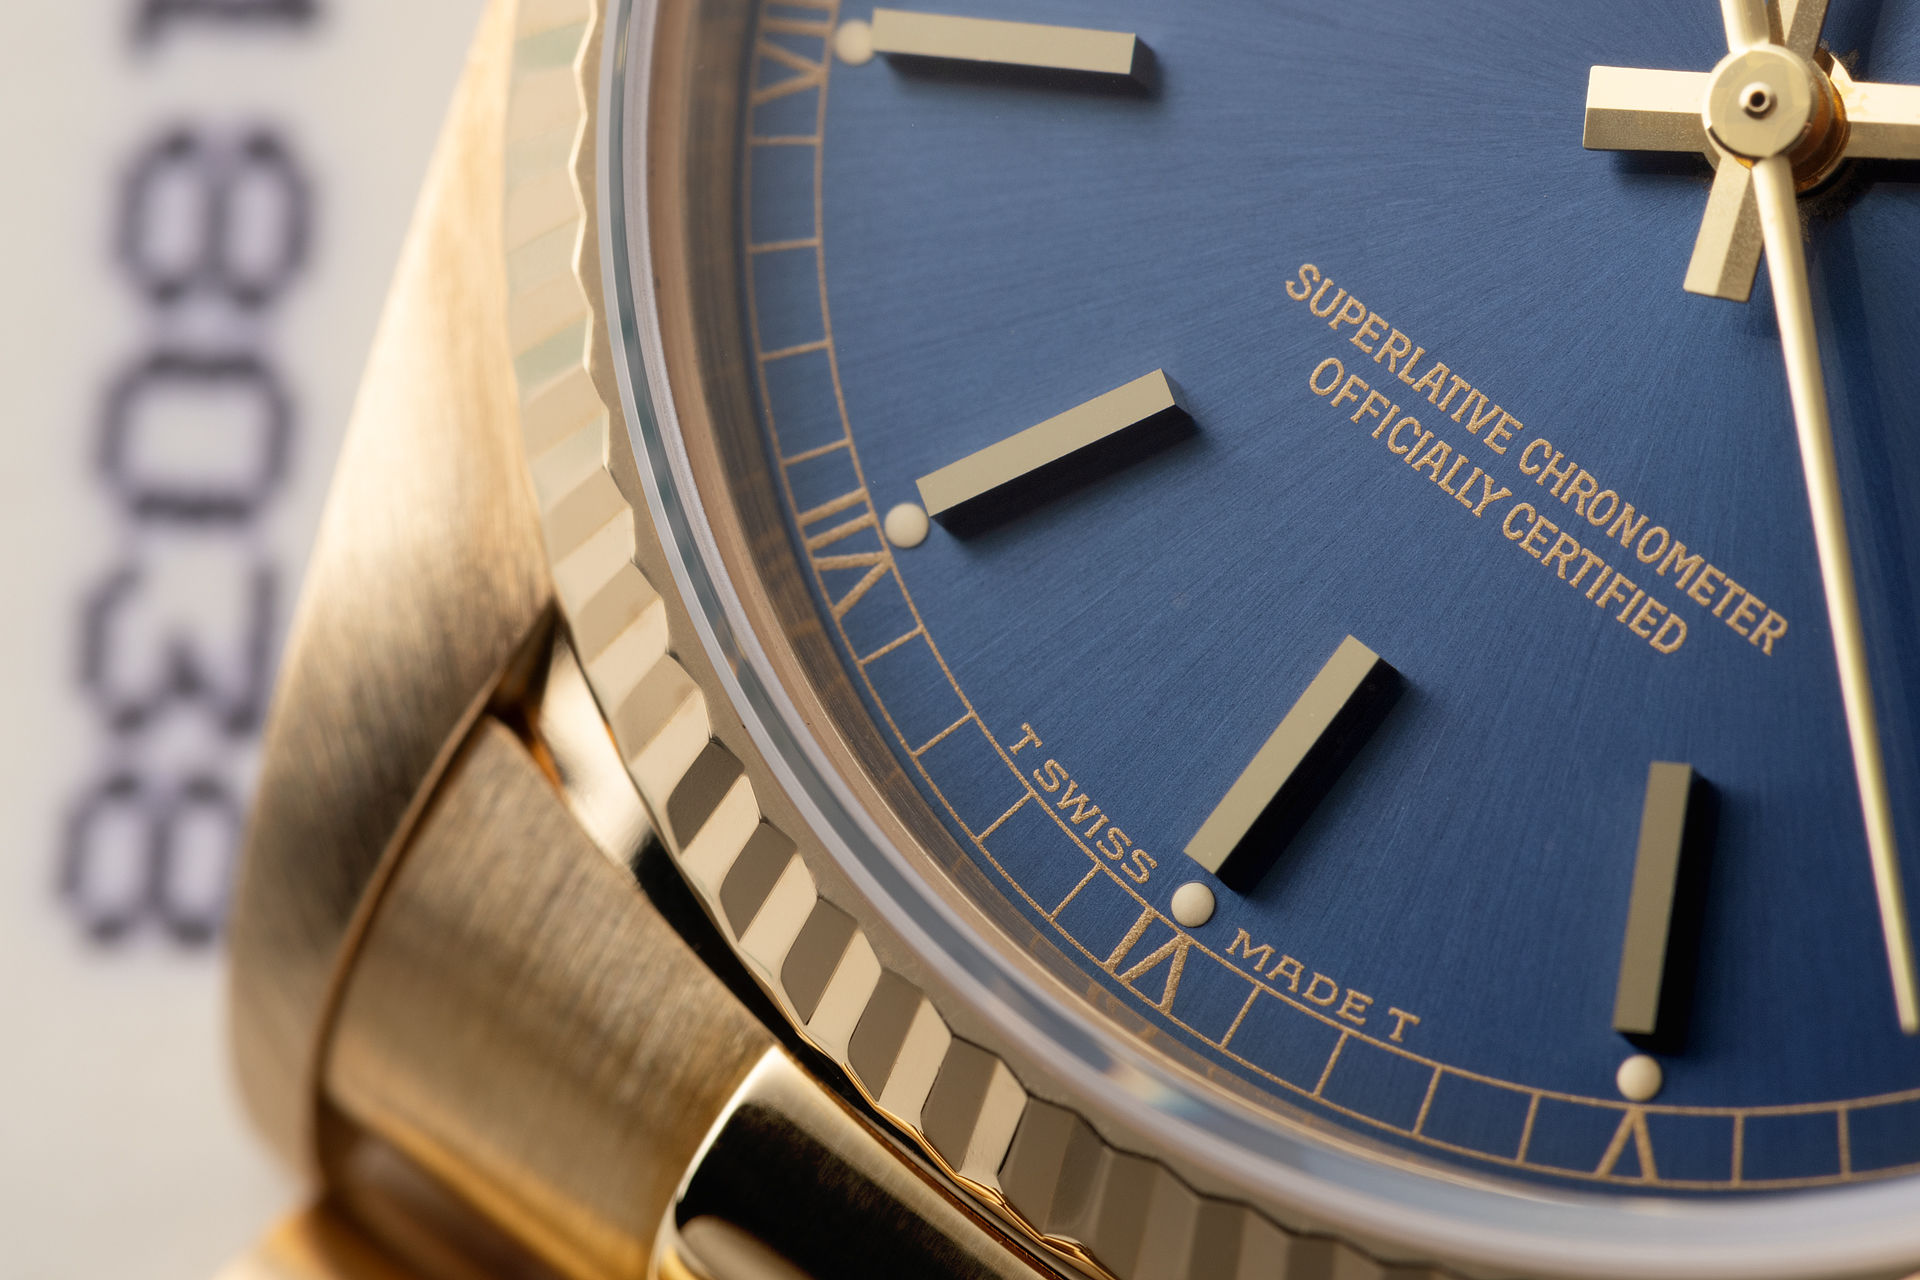 "Beautiful Example" | ref 18038 | Rolex Day-Date